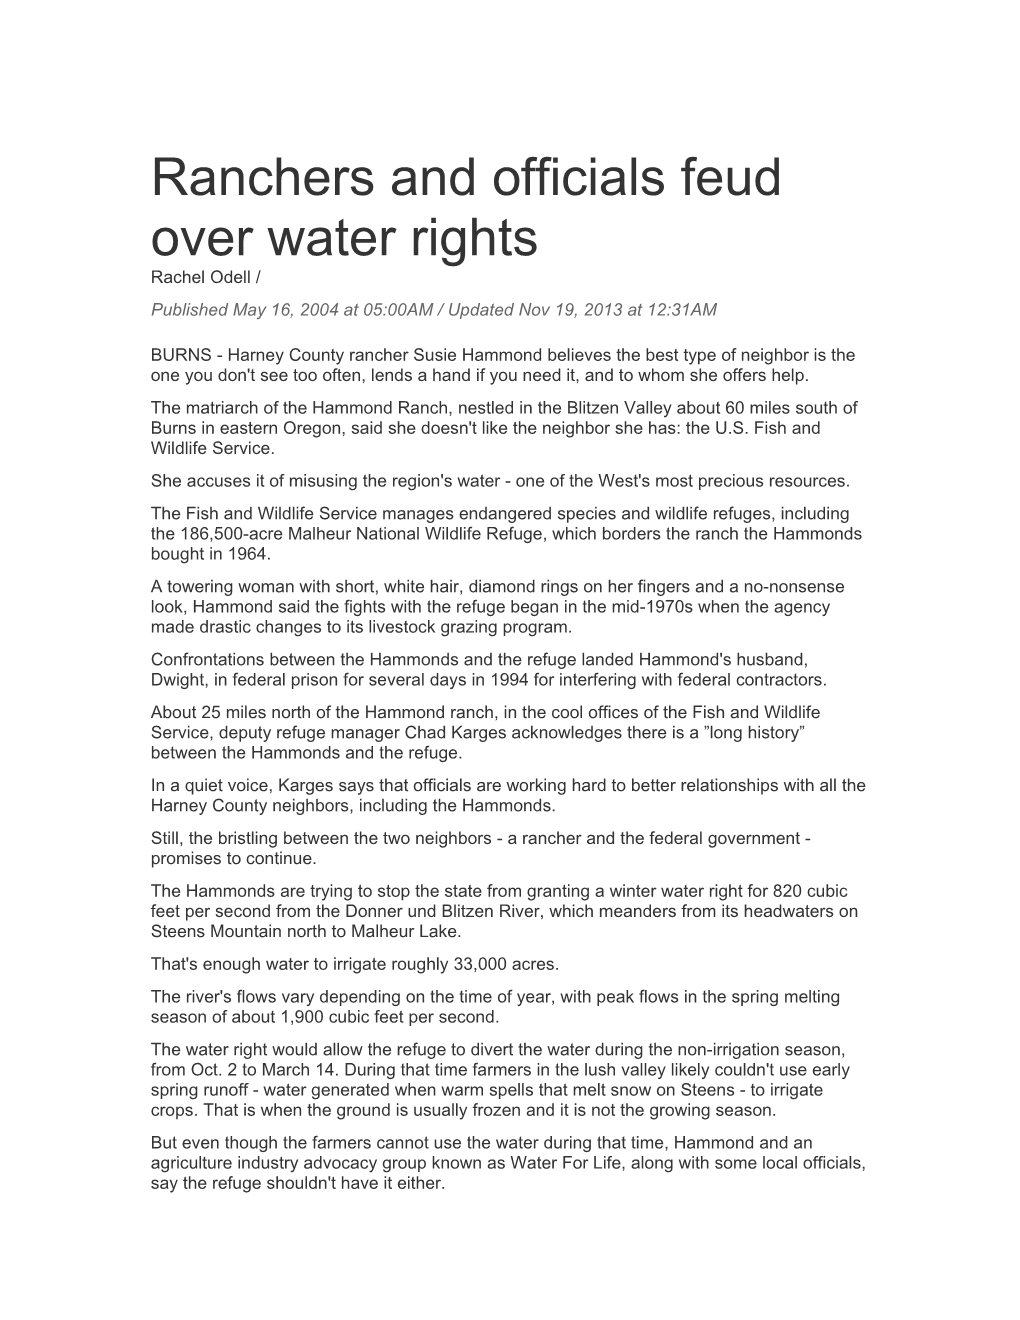 Ranchers and Officials Feud Over Water Rights